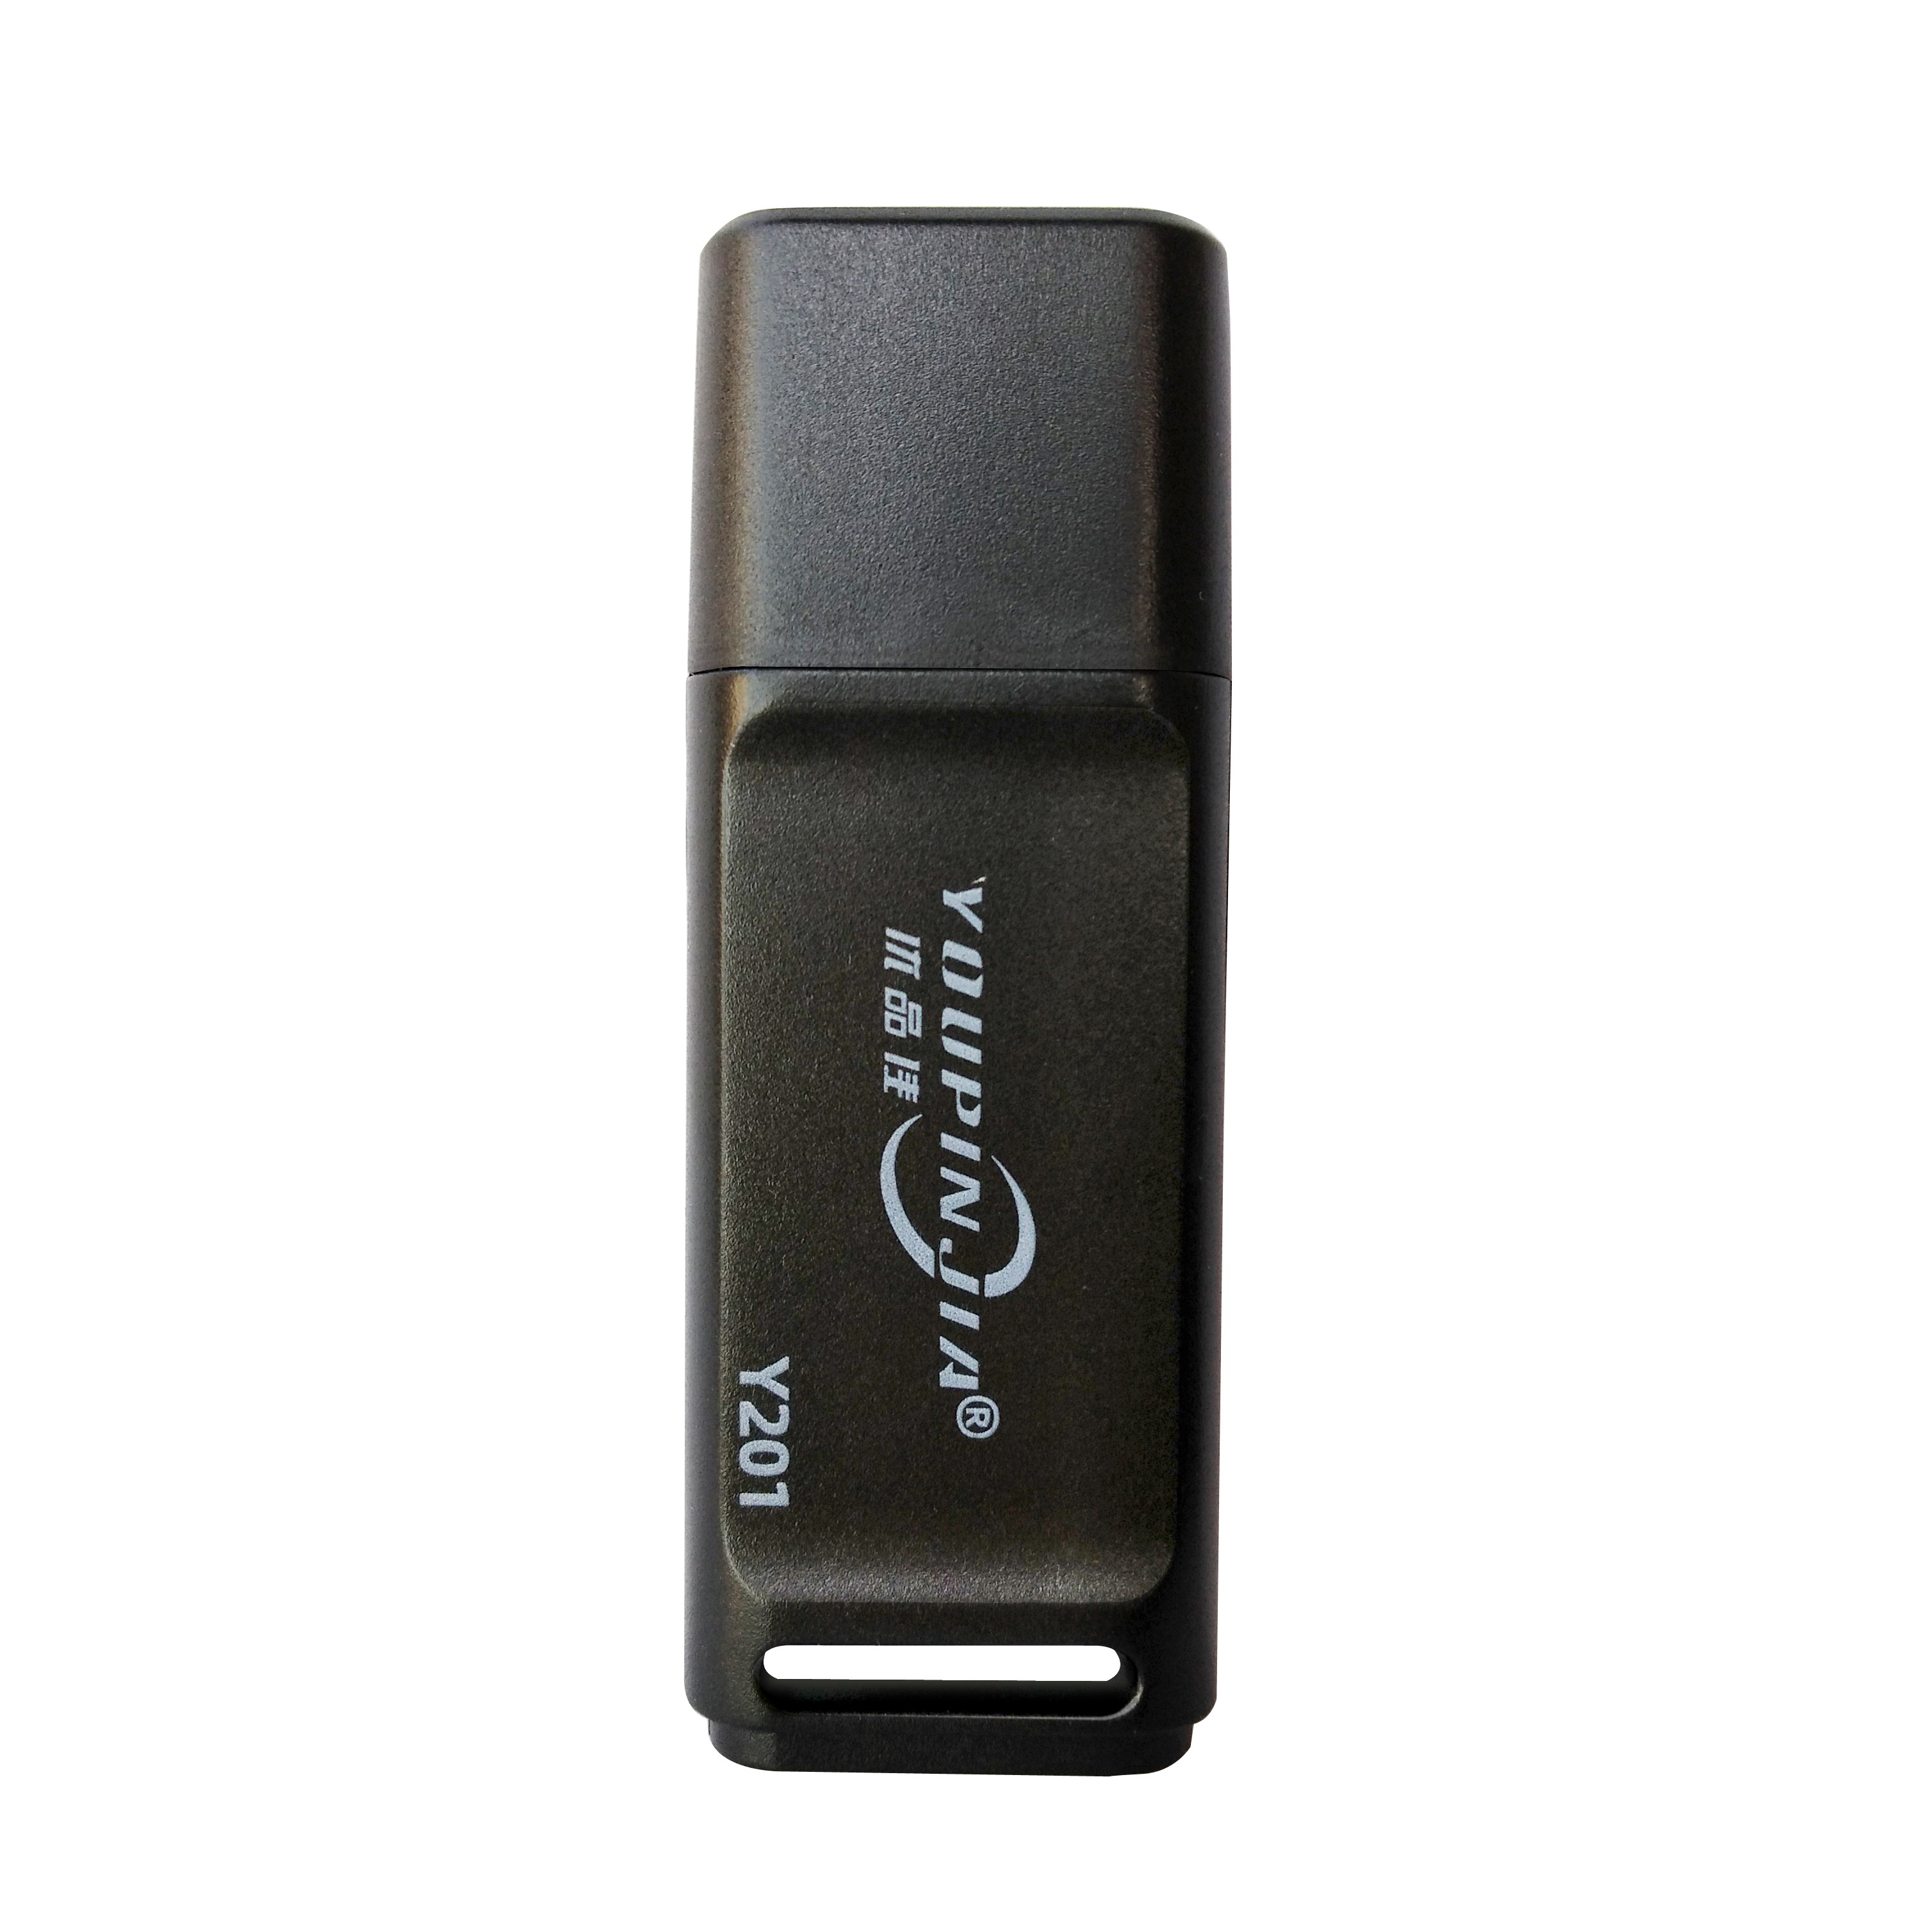 Find USB Flash Drive 32G PenDrive USB2 0 Disk Portable U Disk 64G Thumb Drive for PC Notebook Video Player Plug and Play Black Blue for Sale on Gipsybee.com with cryptocurrencies